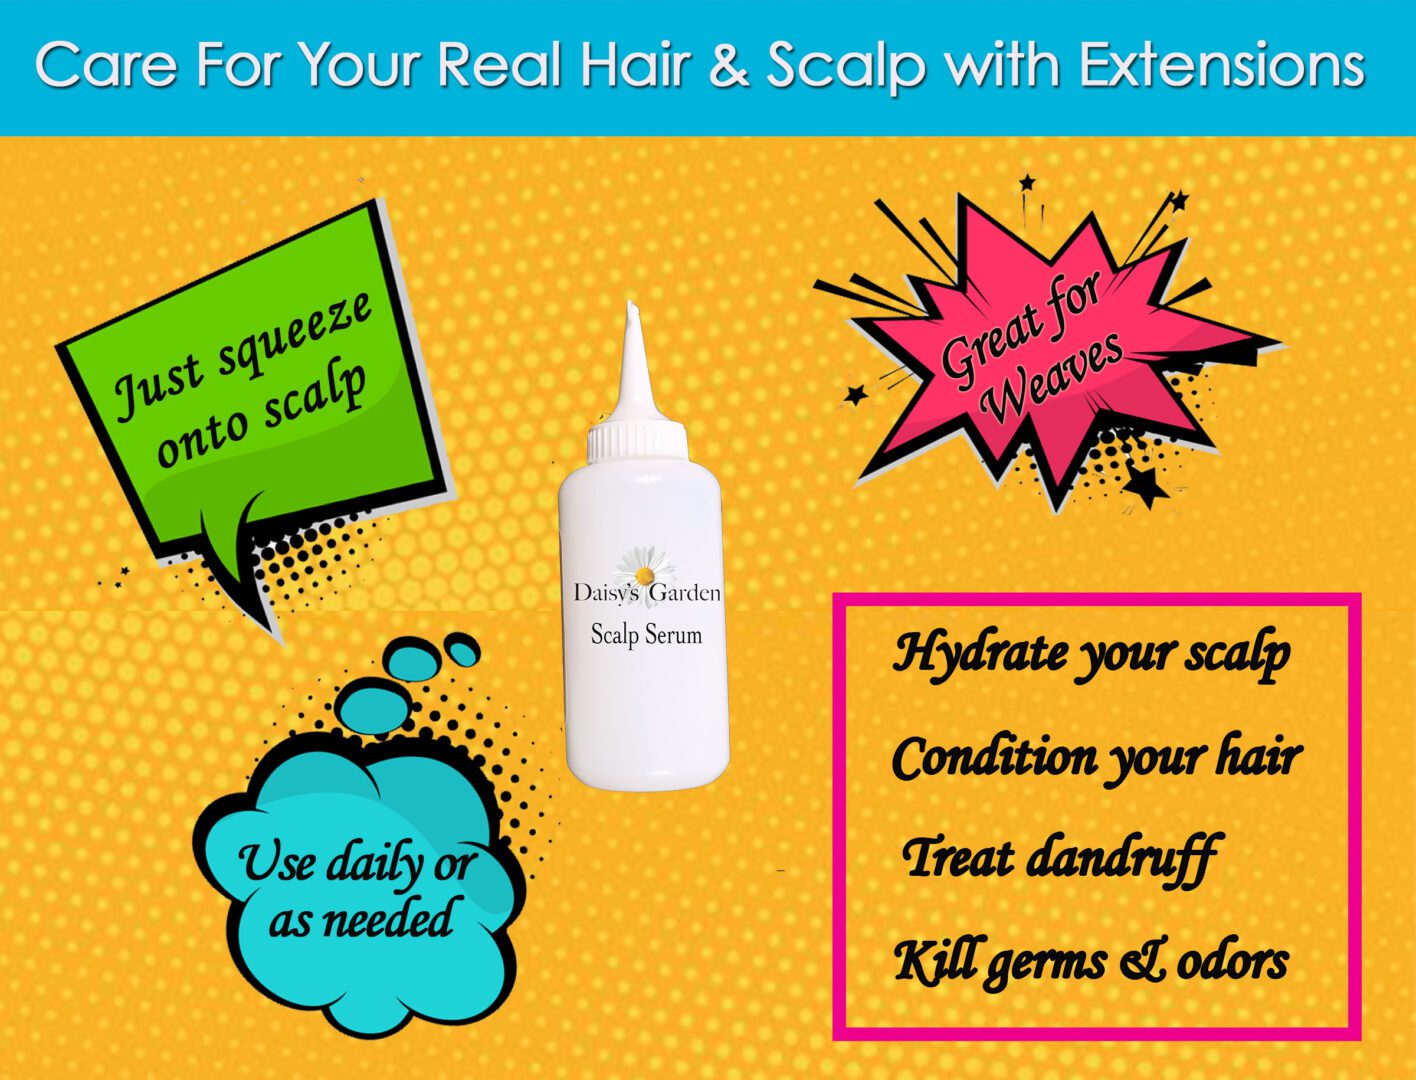 your real hair ext page